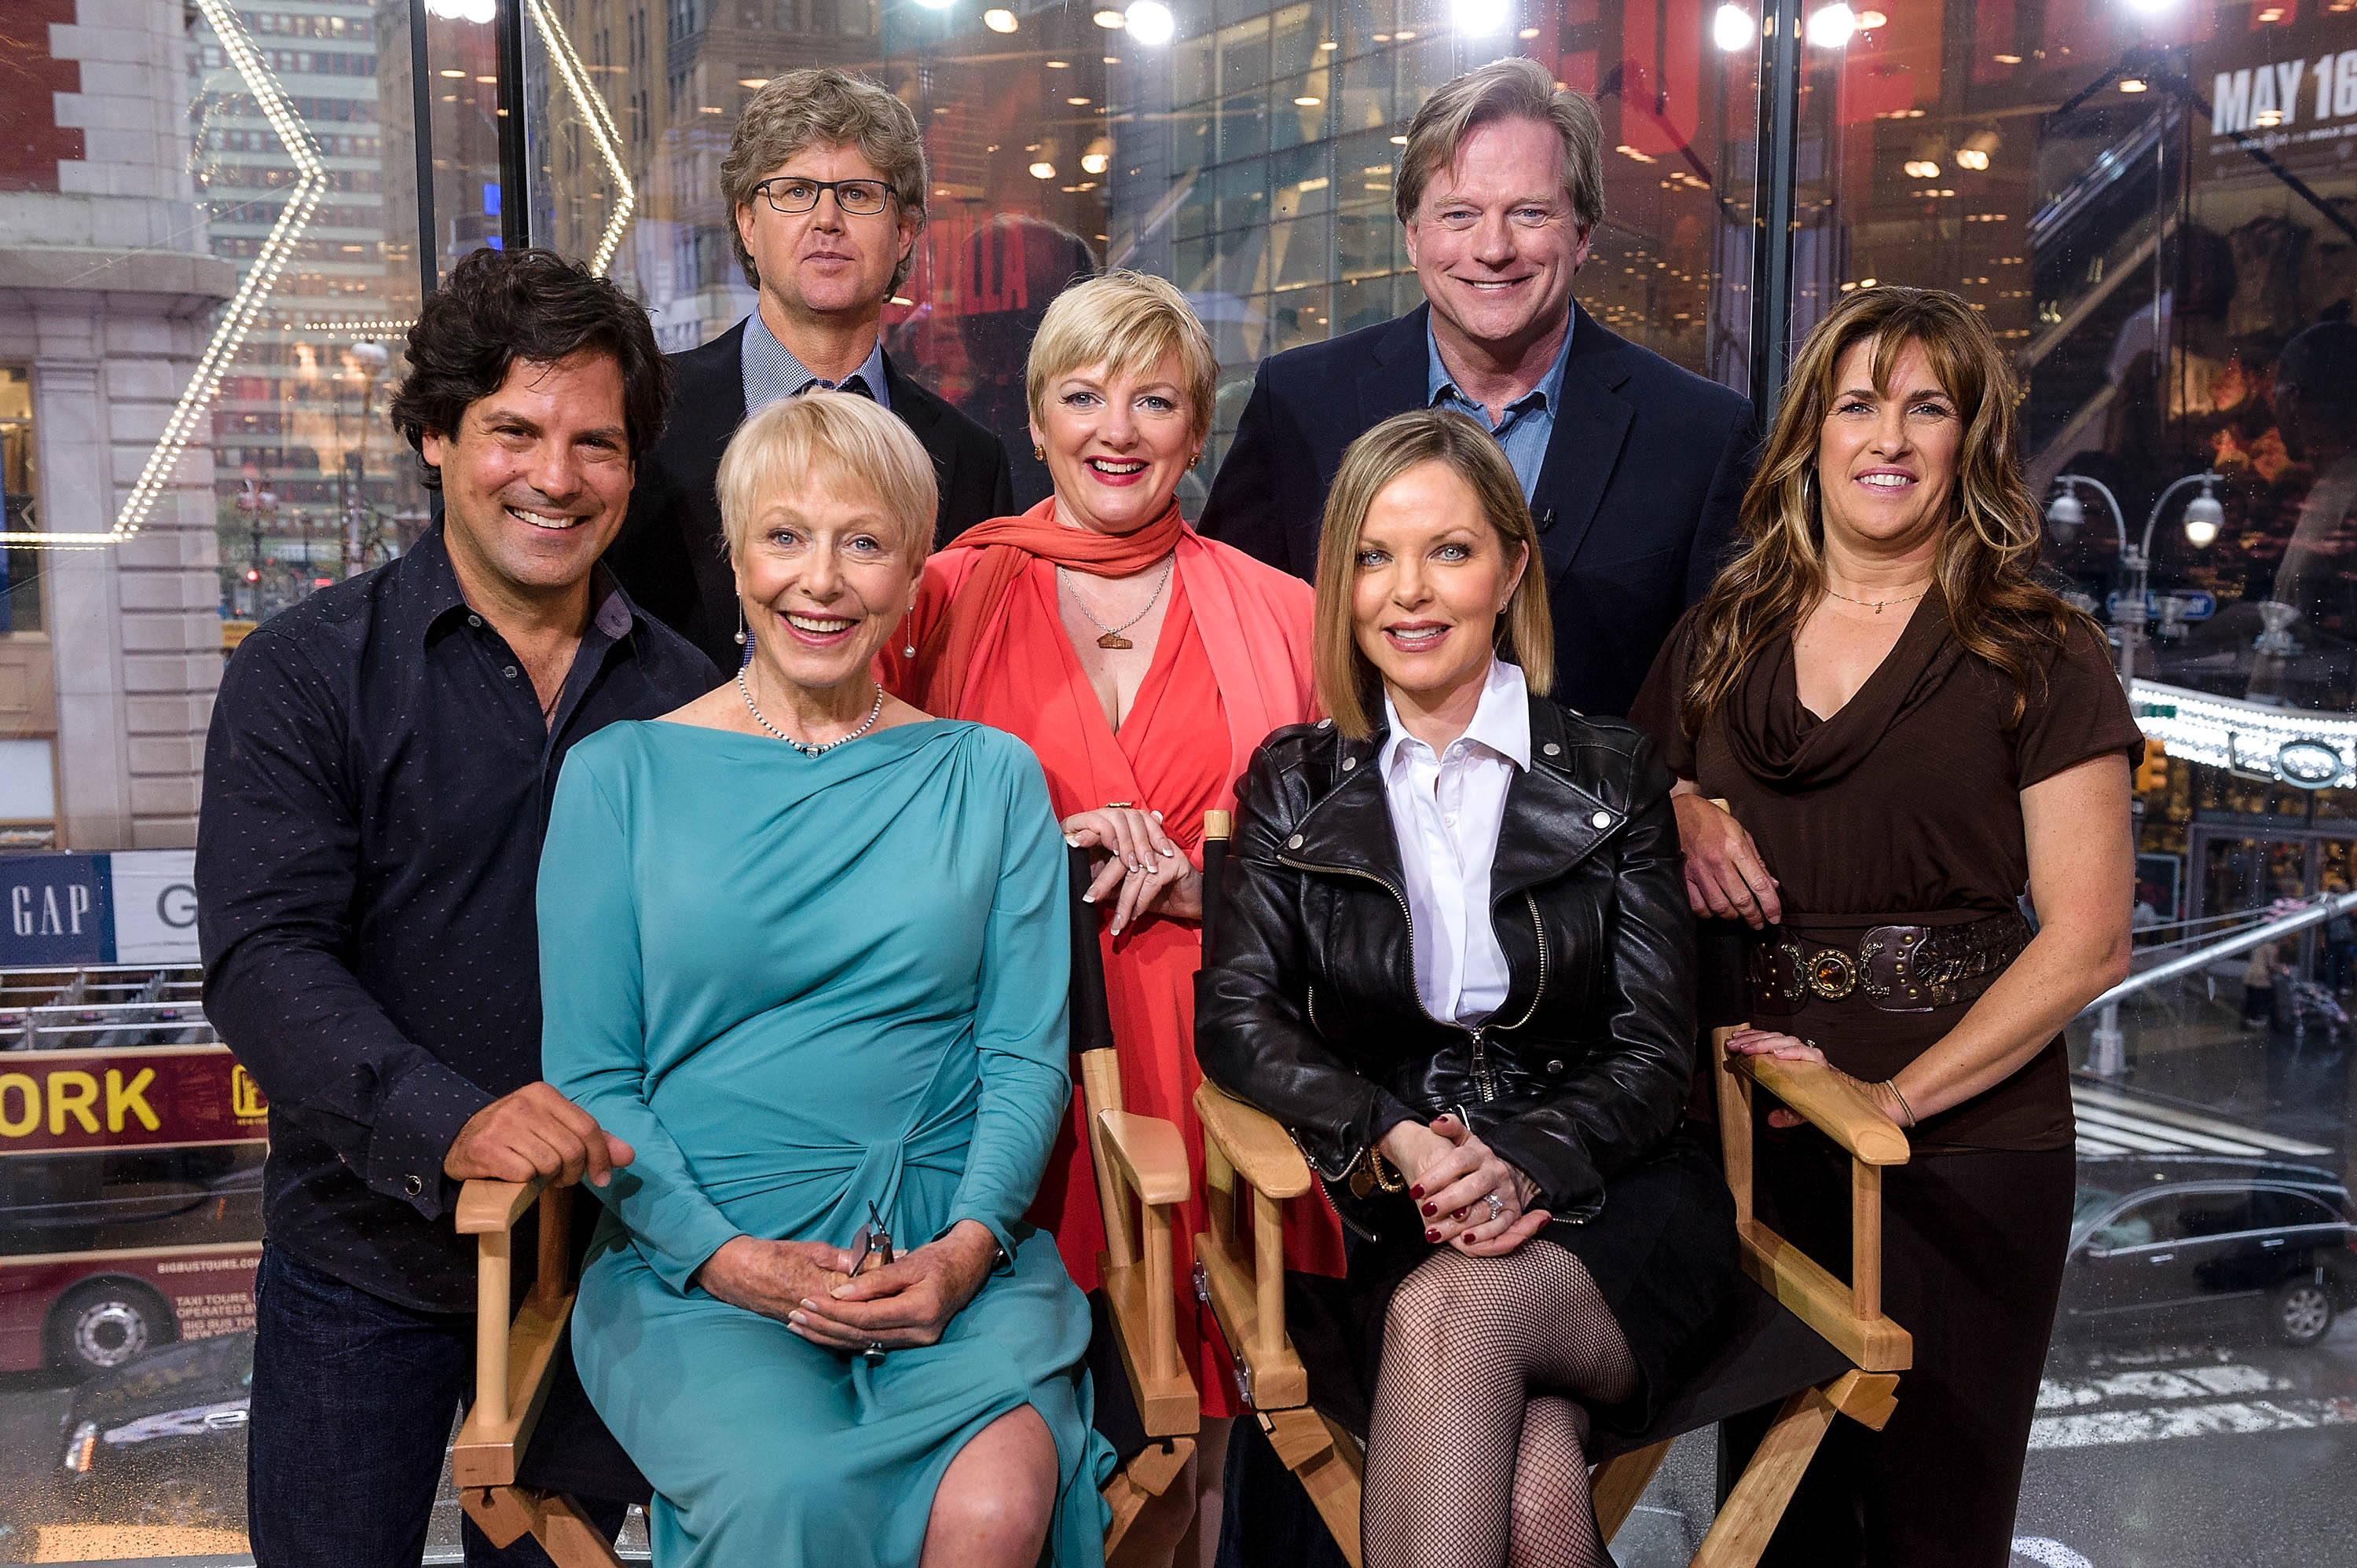  Matthew Labyorteaux, Michael Landon, Jr., Alison Arngrim, Dean Butler, Lindsay Greenbush, (L-R seated) Karen Grassle, and Melissa Sue Anderson of 'Little House On The Prairie' visit "Extra" at their New York studios at H&M in Times Square on April 30, 2014 in New York City.